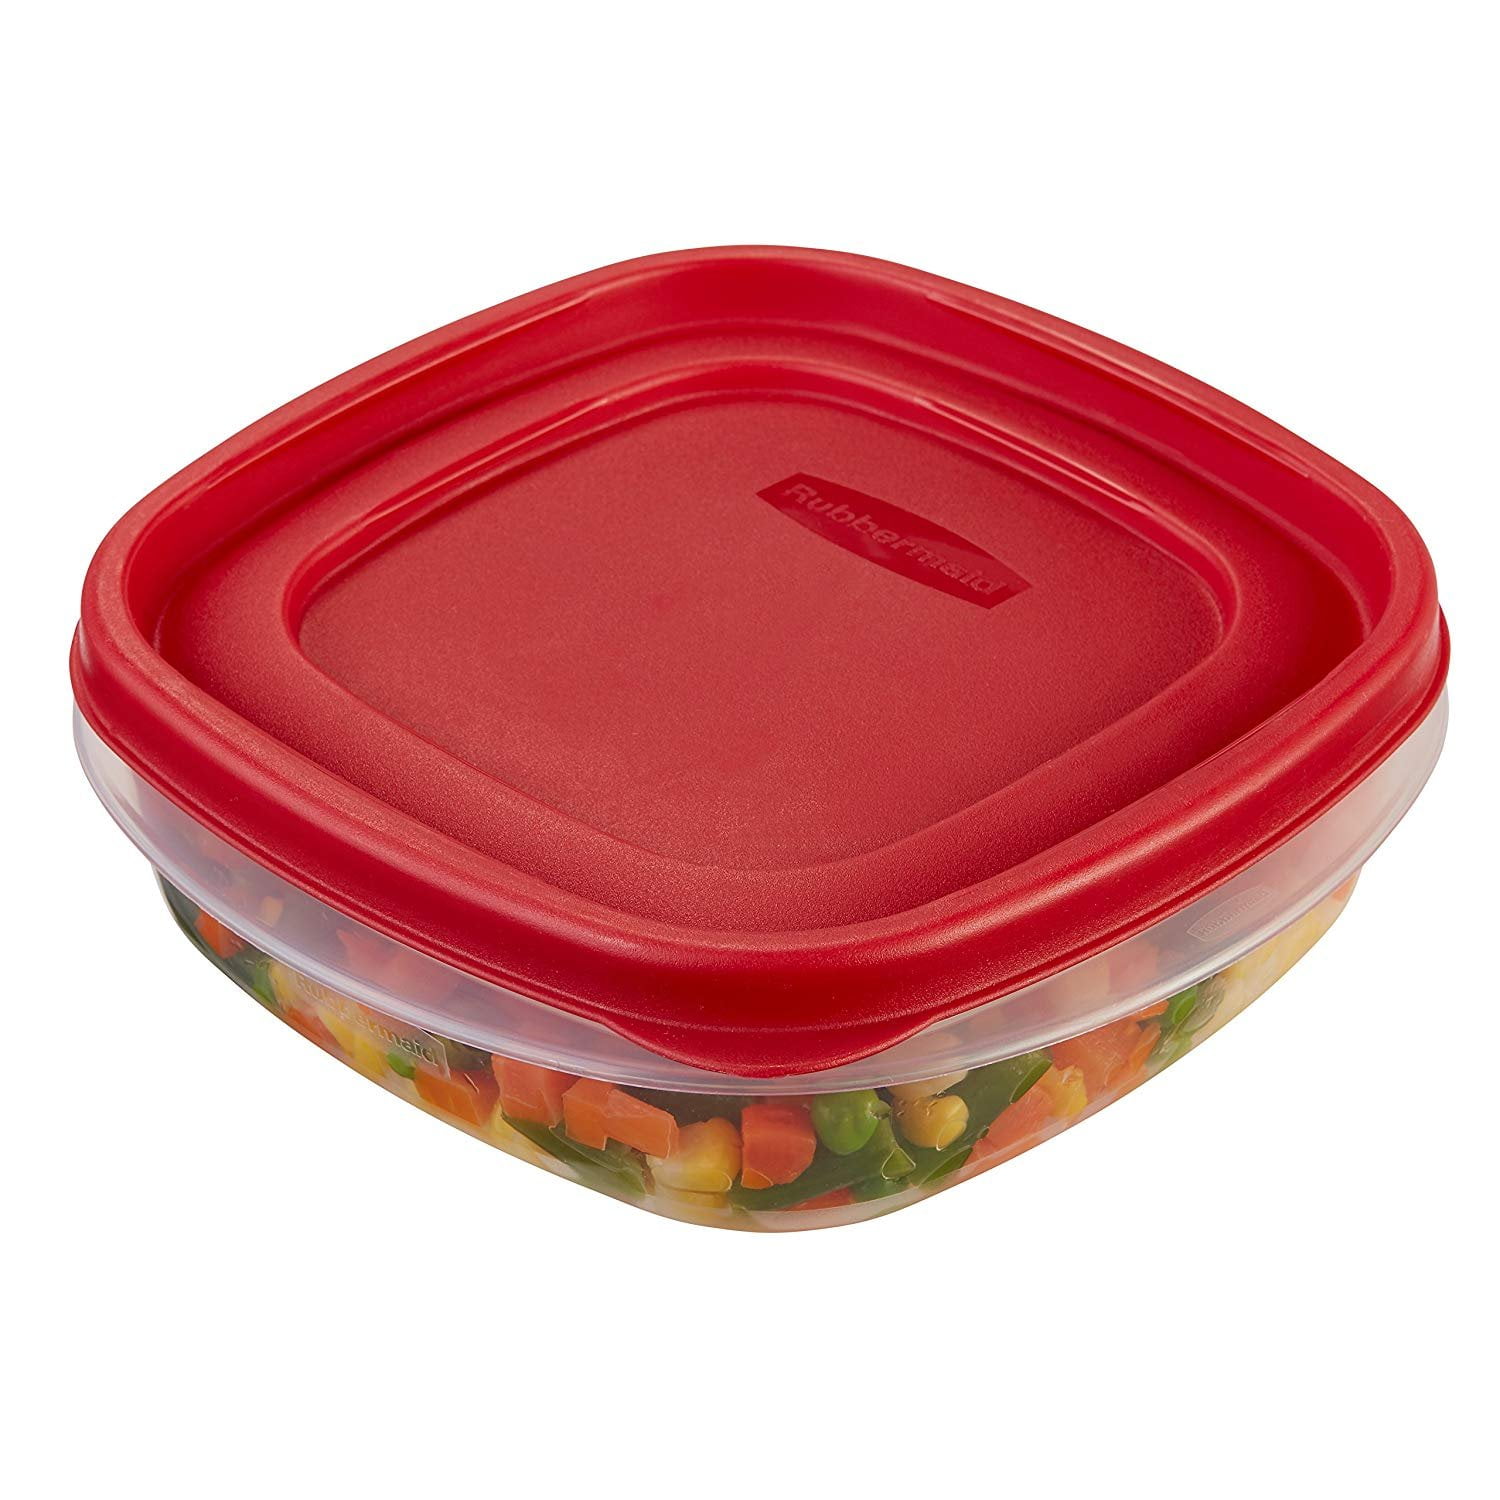 Rubbermaid® Easy-Find Lids Food Storage Container with Dividers - Racer  Red, 1 Count - Ralphs